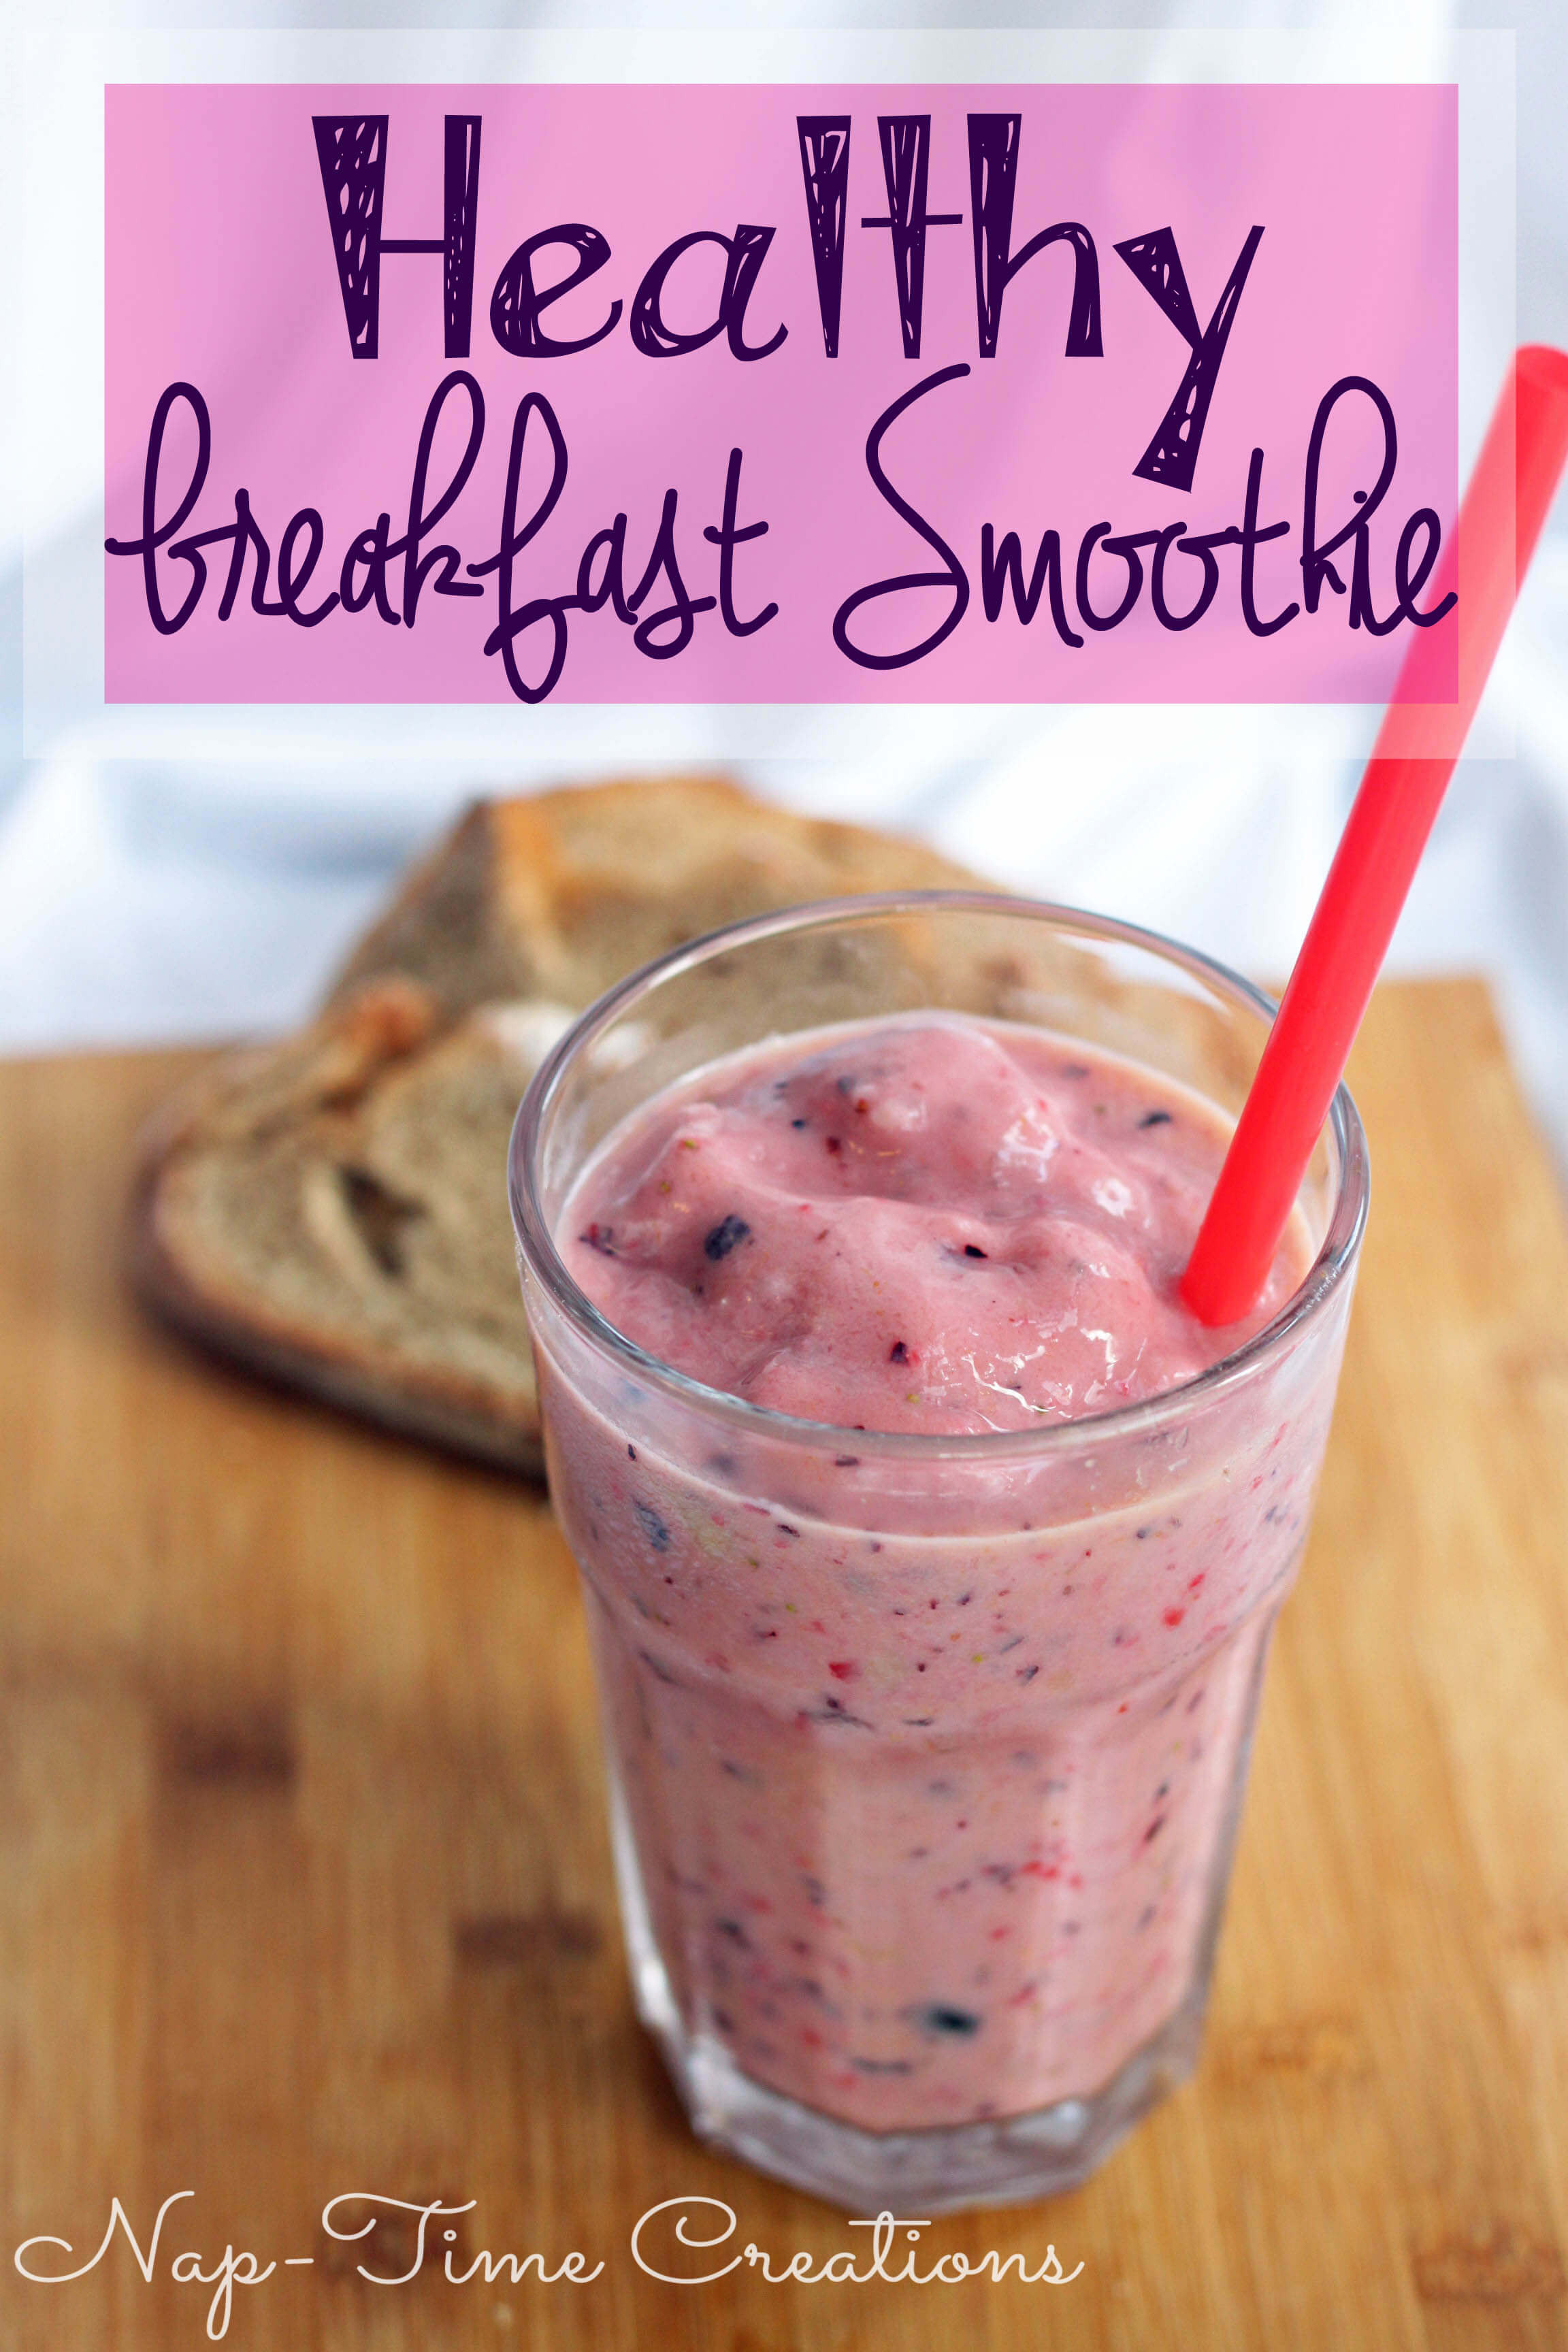 Healthy Smoothie Recipes For Breakfast
 Healthy Breakfast Smoothie Recipe Life Sew Savory